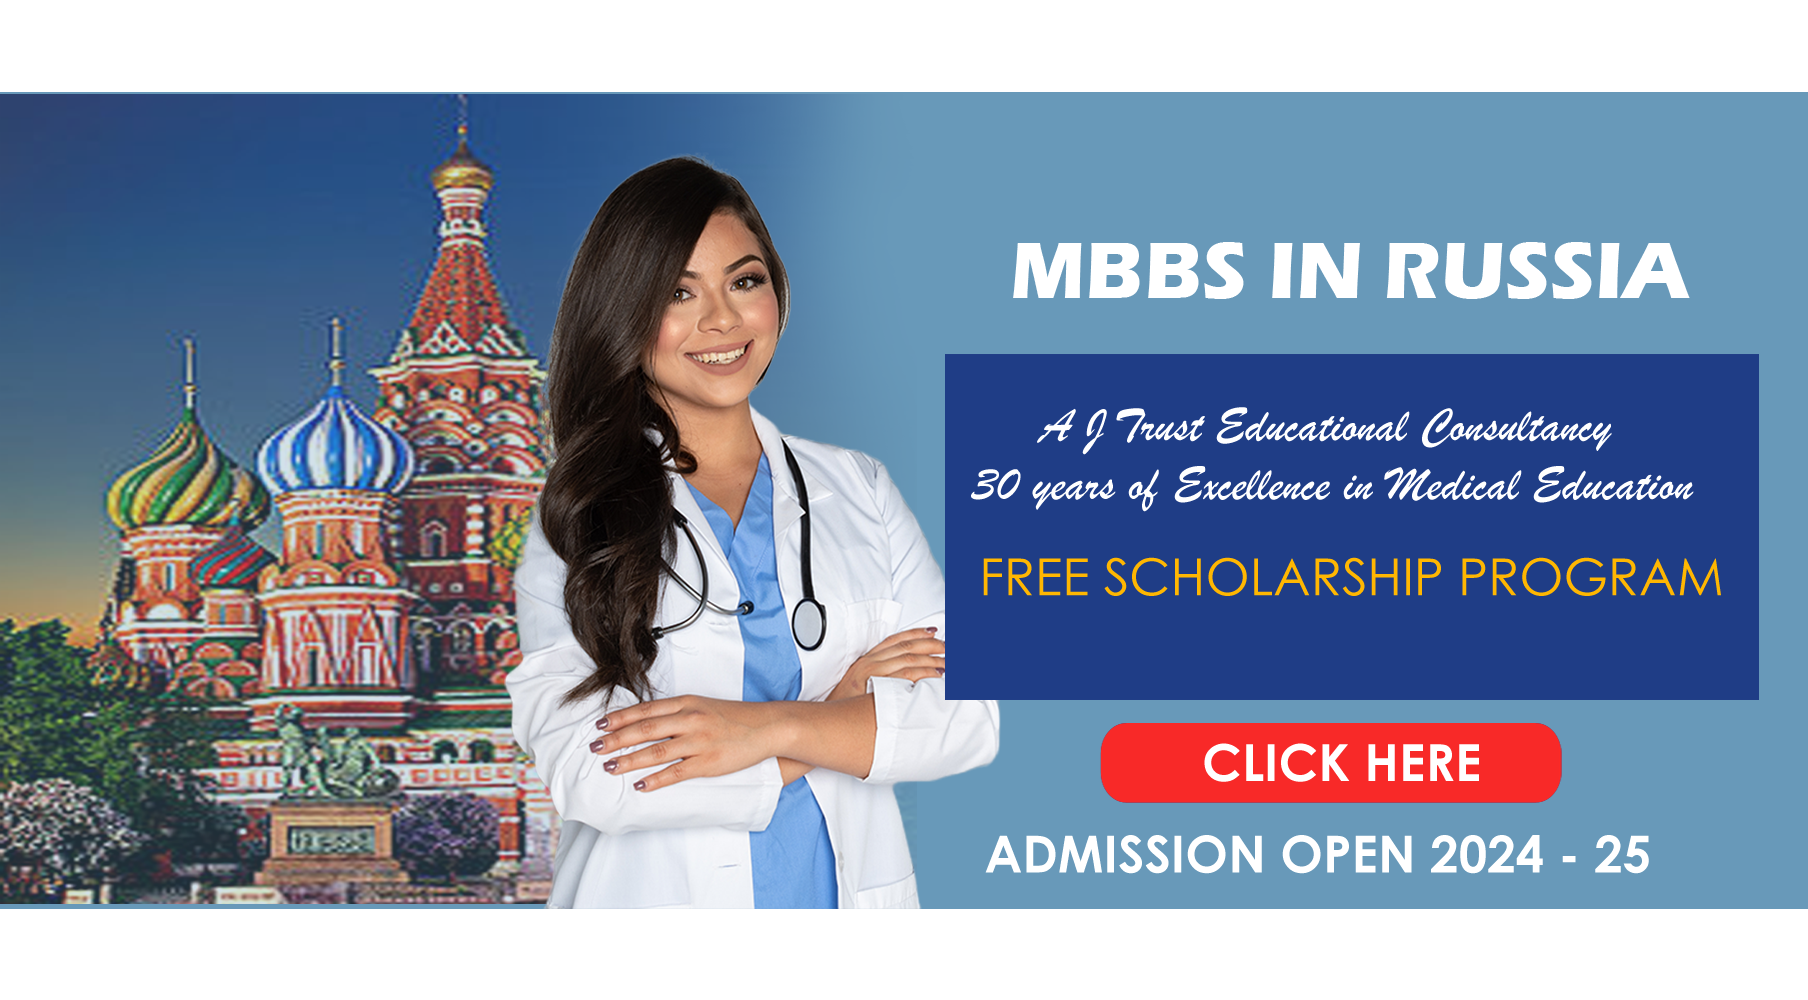 mbbs in russia consultant in Chennai mbbs in russian consultant in Chennai mbbs admissions in russia consultant mbbs in russian consultant mbbs in russia consultant study medicine in russia internship for foreign medical graduates in tamilnadu medical pg in russia russian medical college fees medical in russia consultant